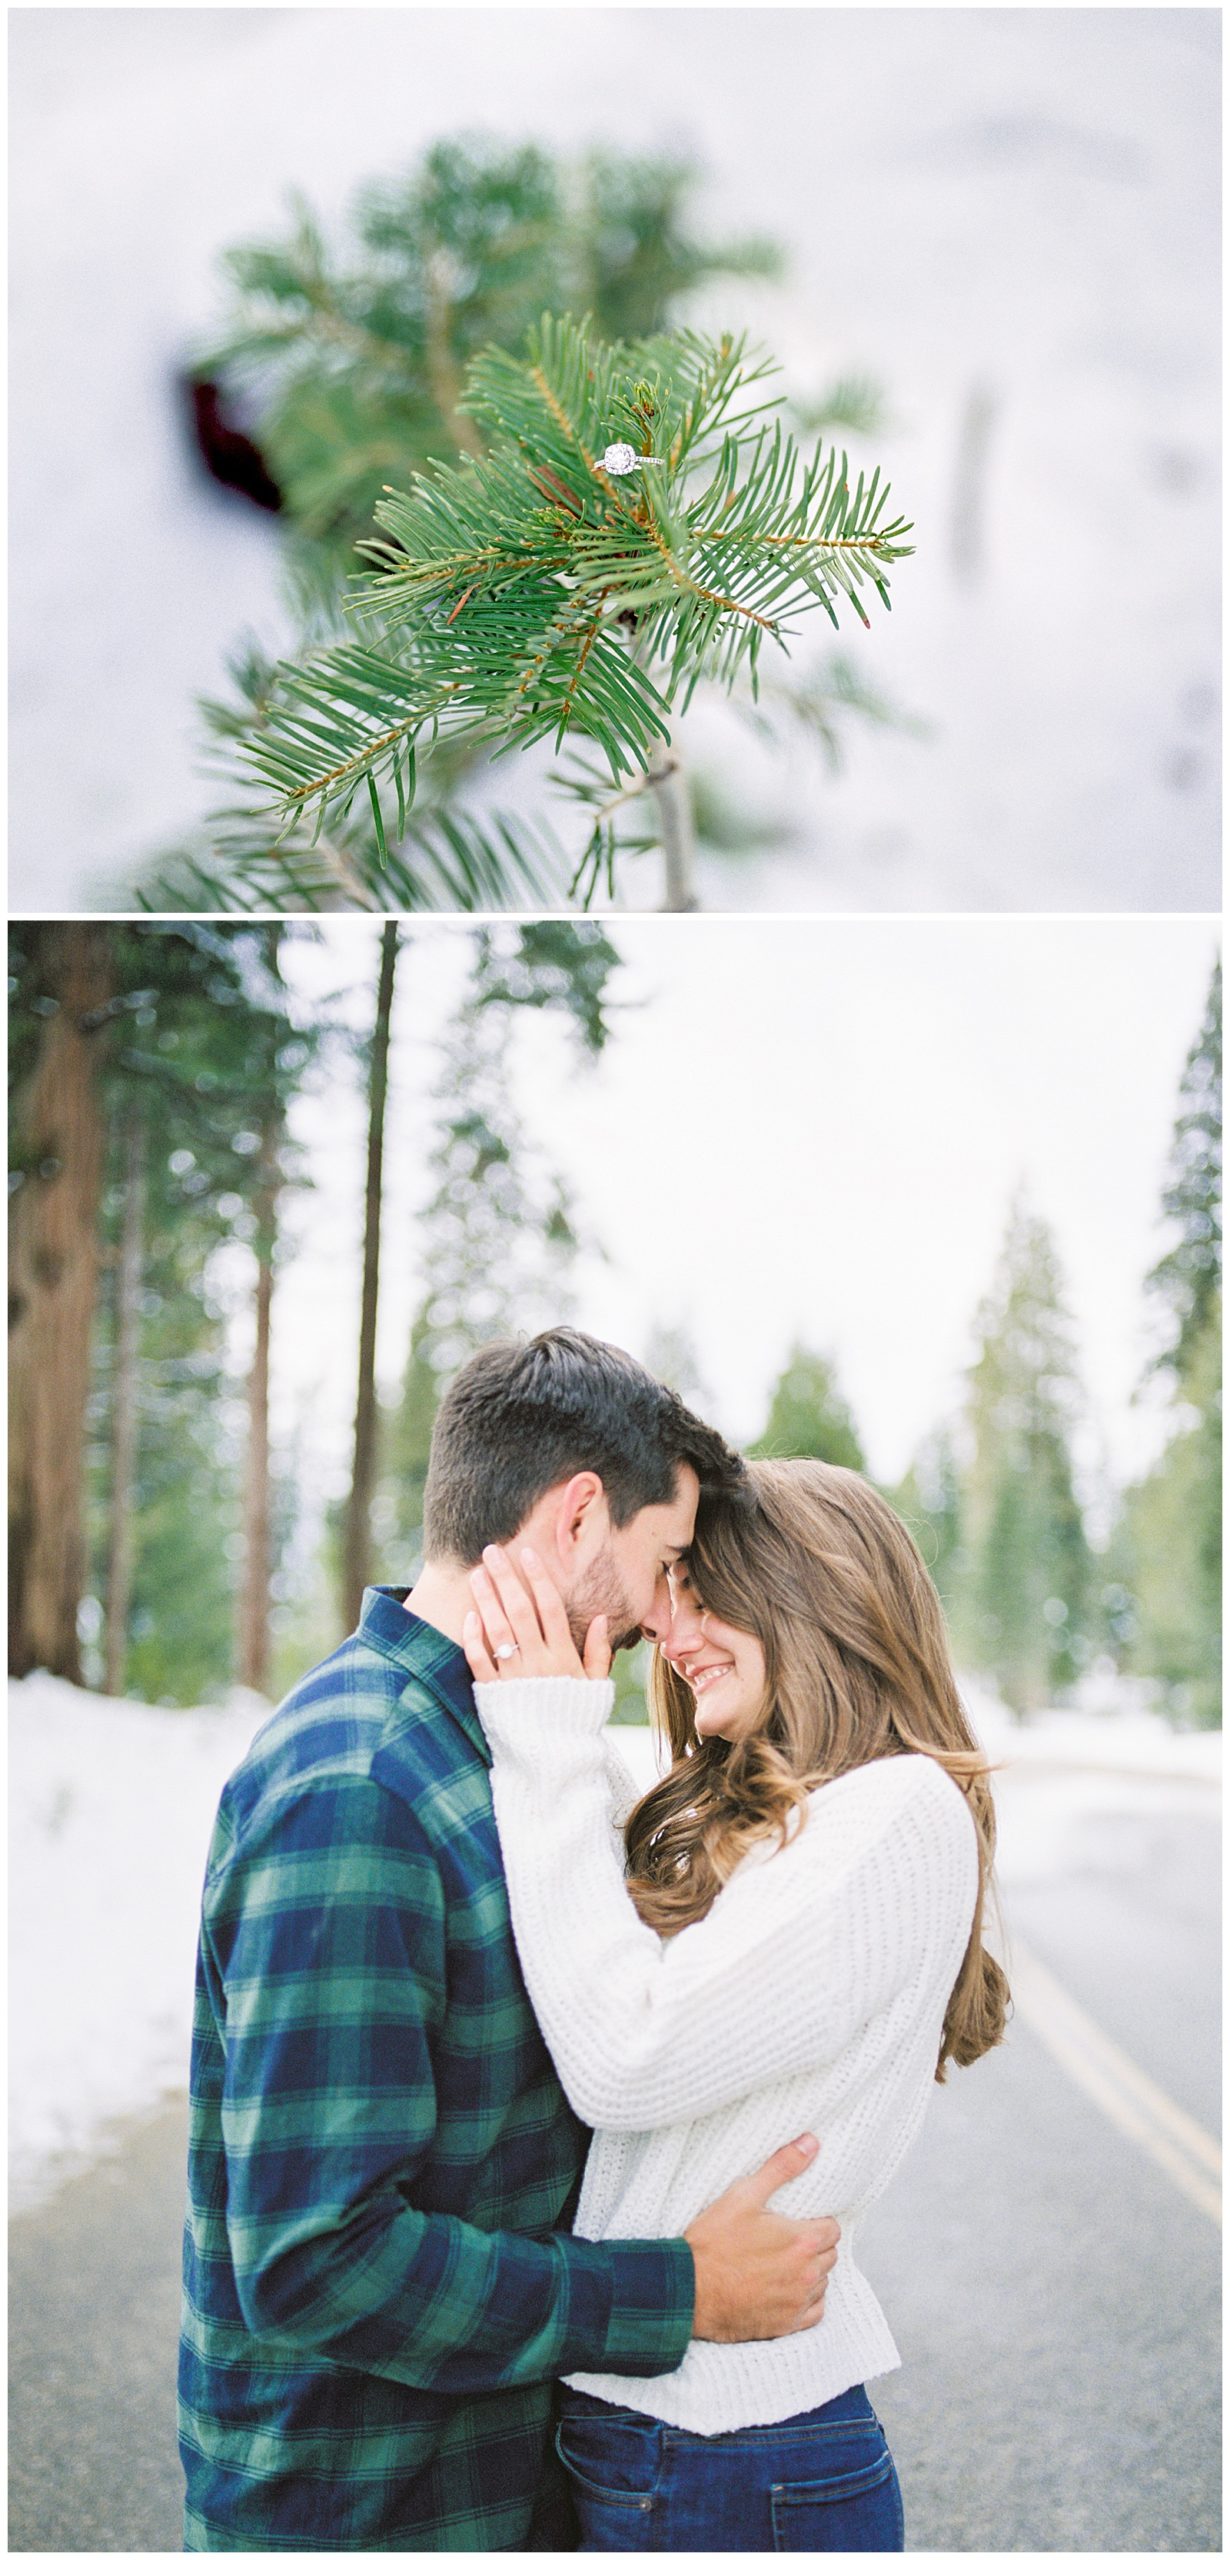 fuji400h film engaged couple embracing almost kiss shot on pentax645n